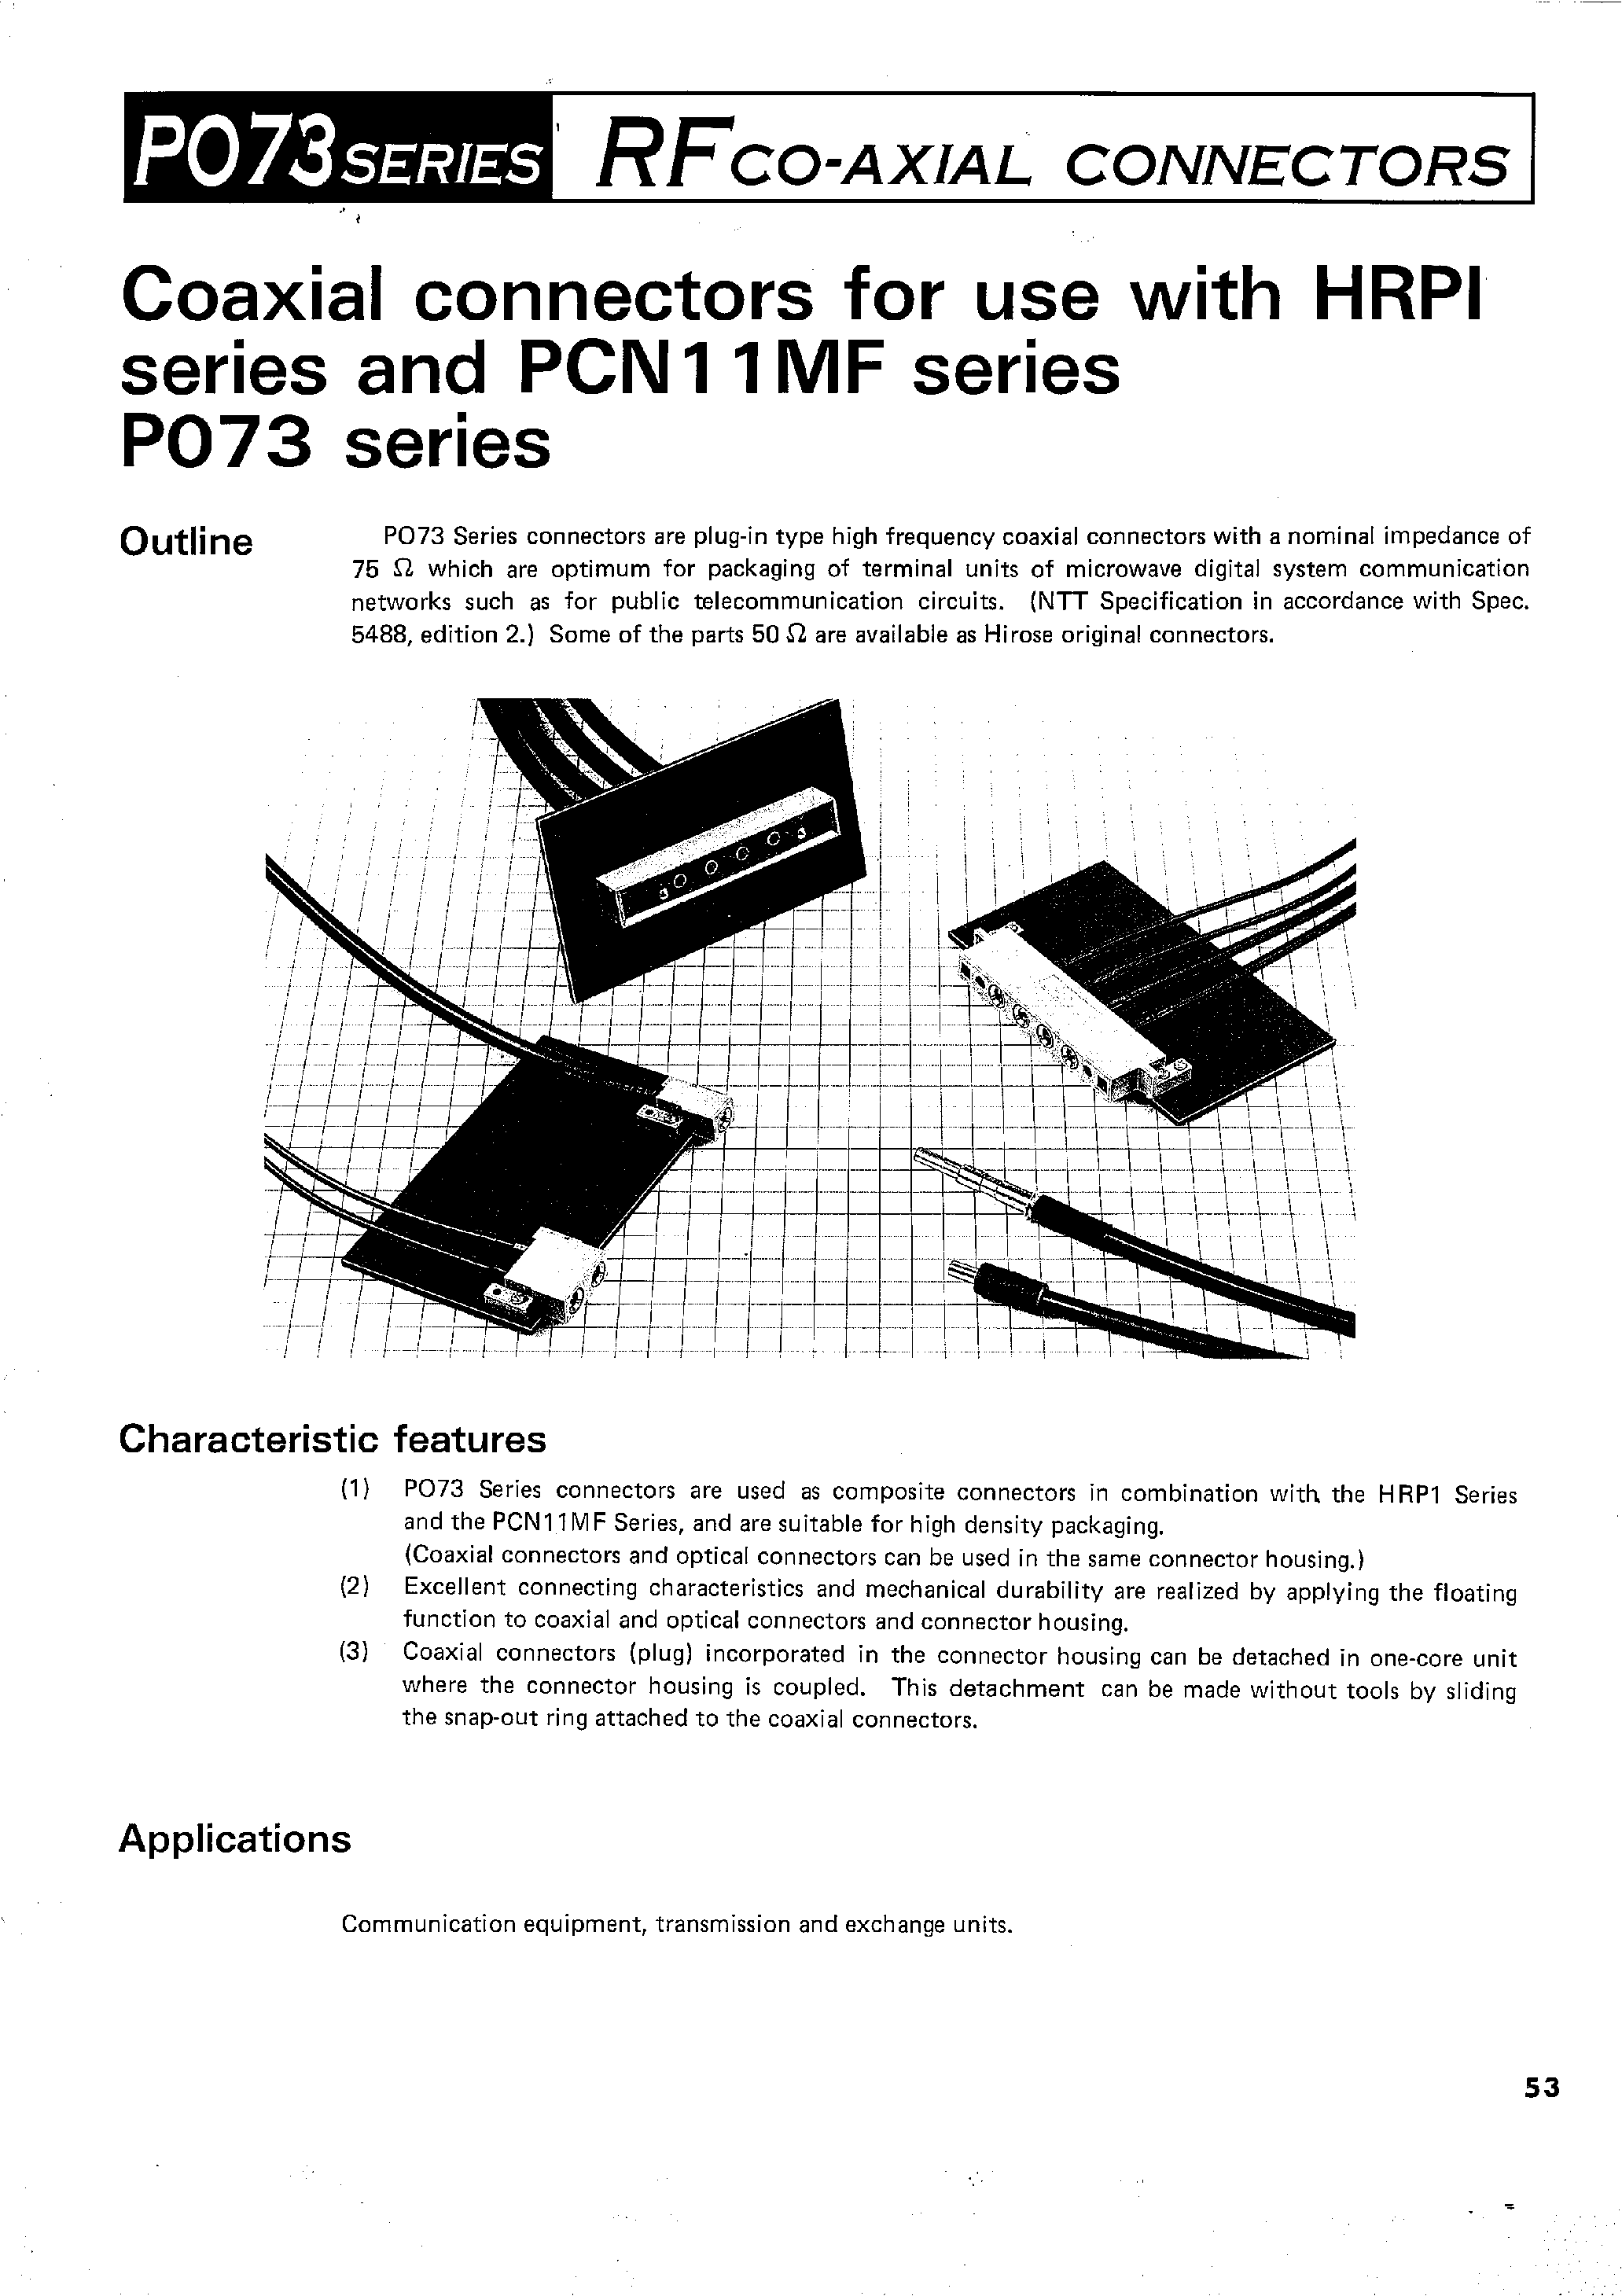 Даташит PO73-P-3CT - RFCO-AXIAL CONNECTORS(COAXIAL CONNECTORS for use with HRPI) страница 1